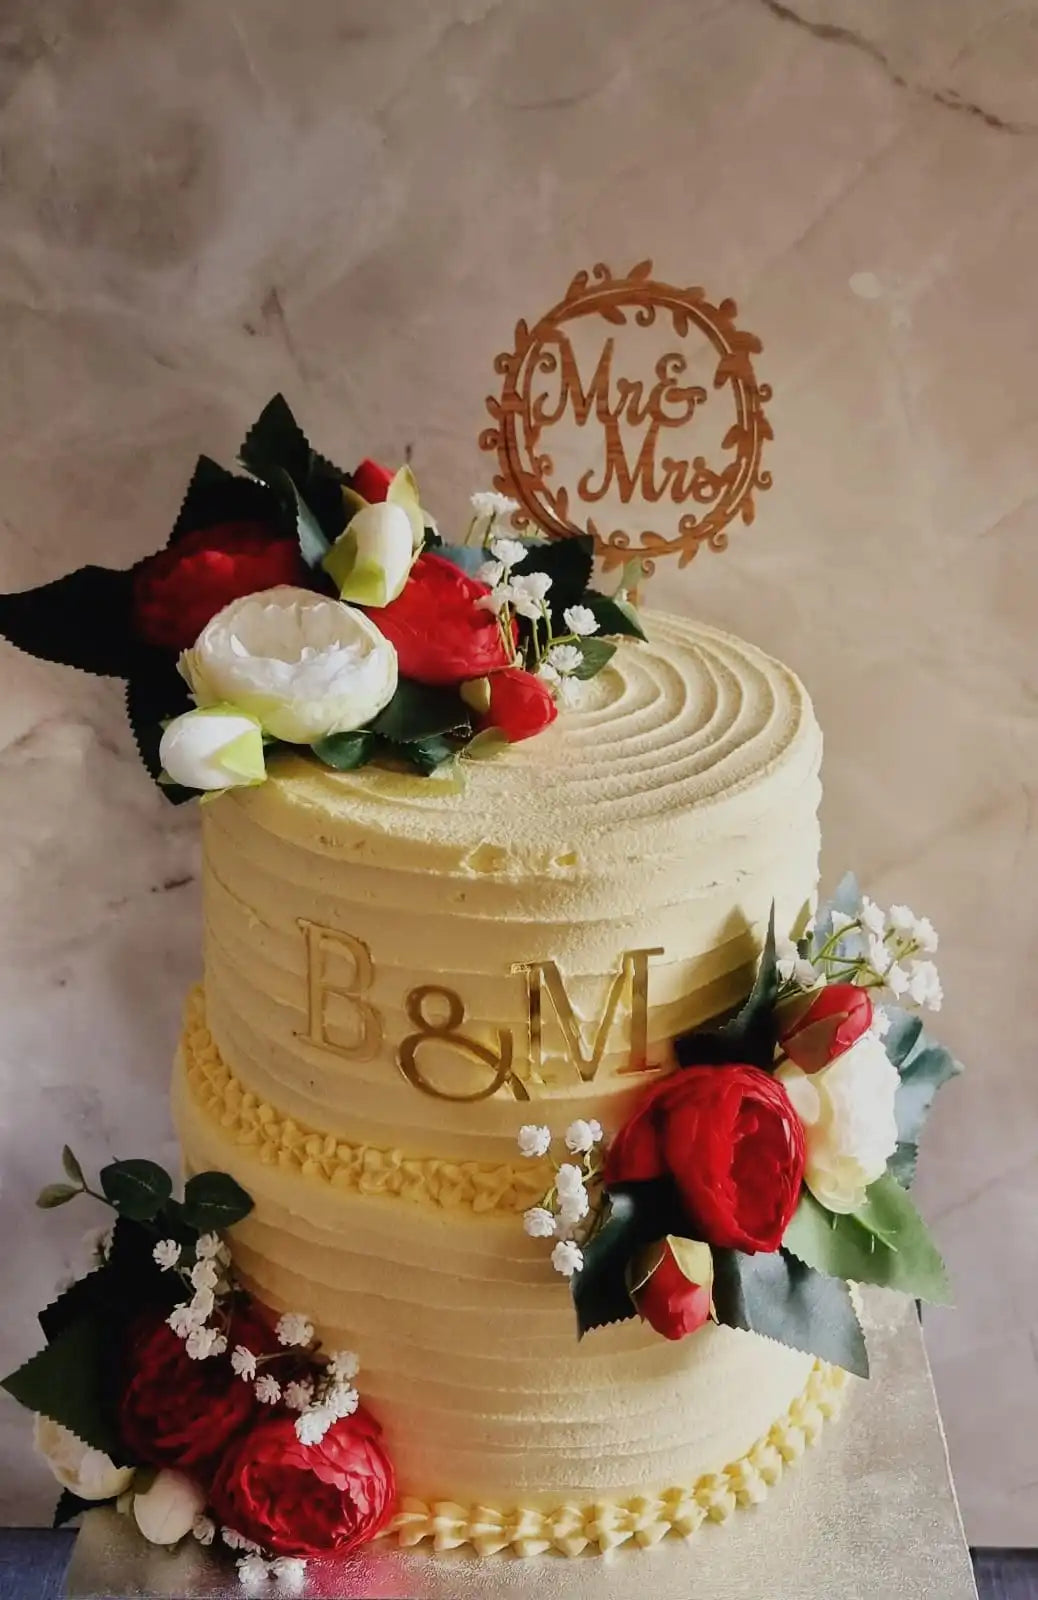 The Best Wedding Celebration Cake (2 Tier) in Romford and East London - Same and Next Day Delivery - Cake Trays